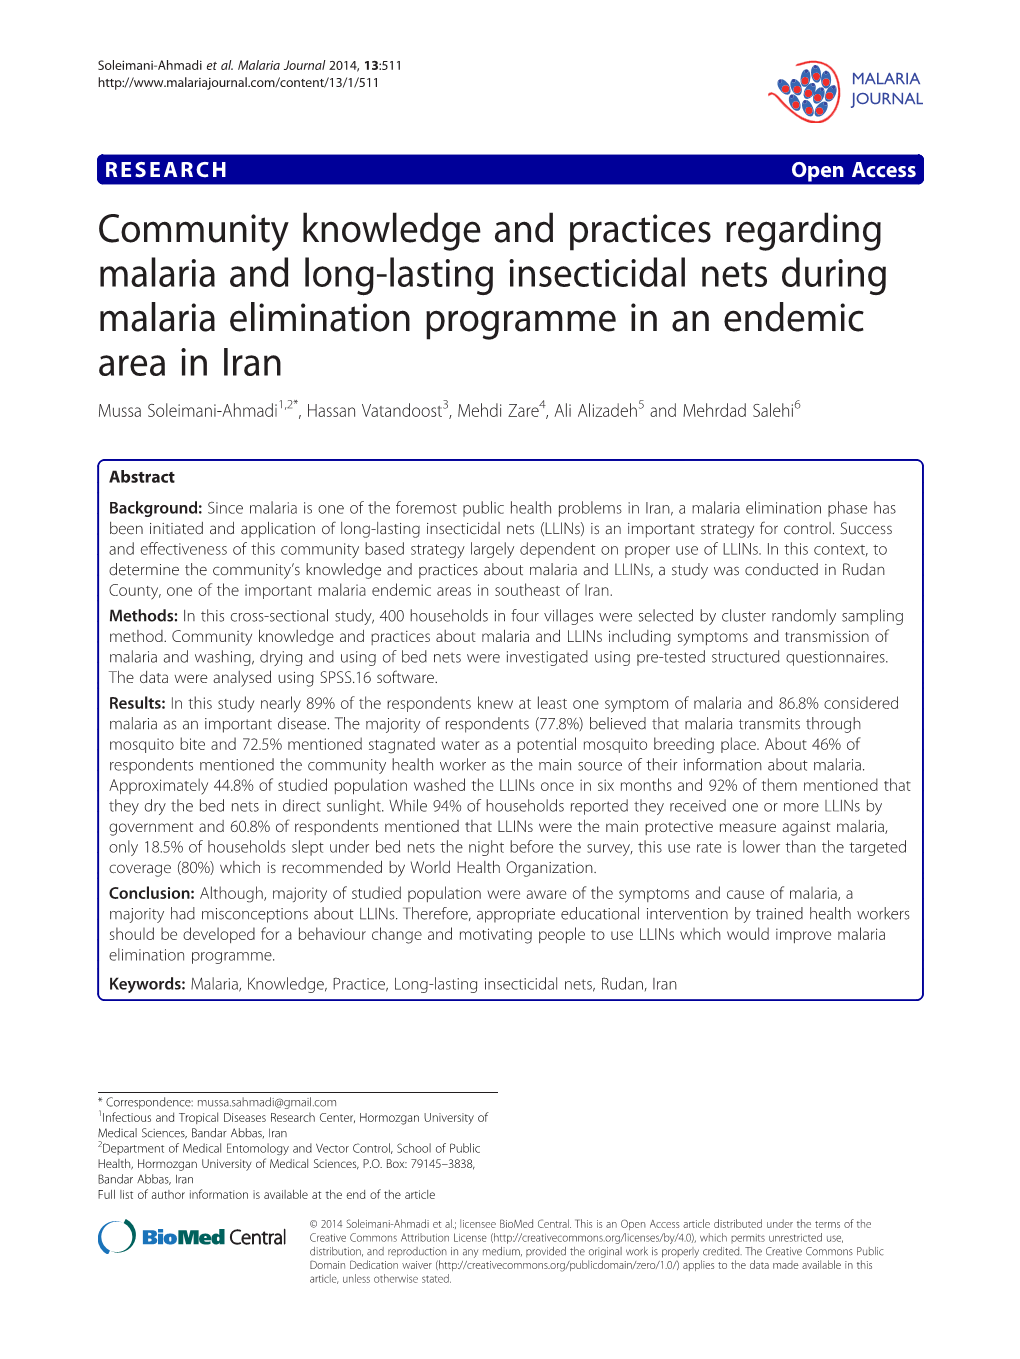 Community Knowledge and Practices